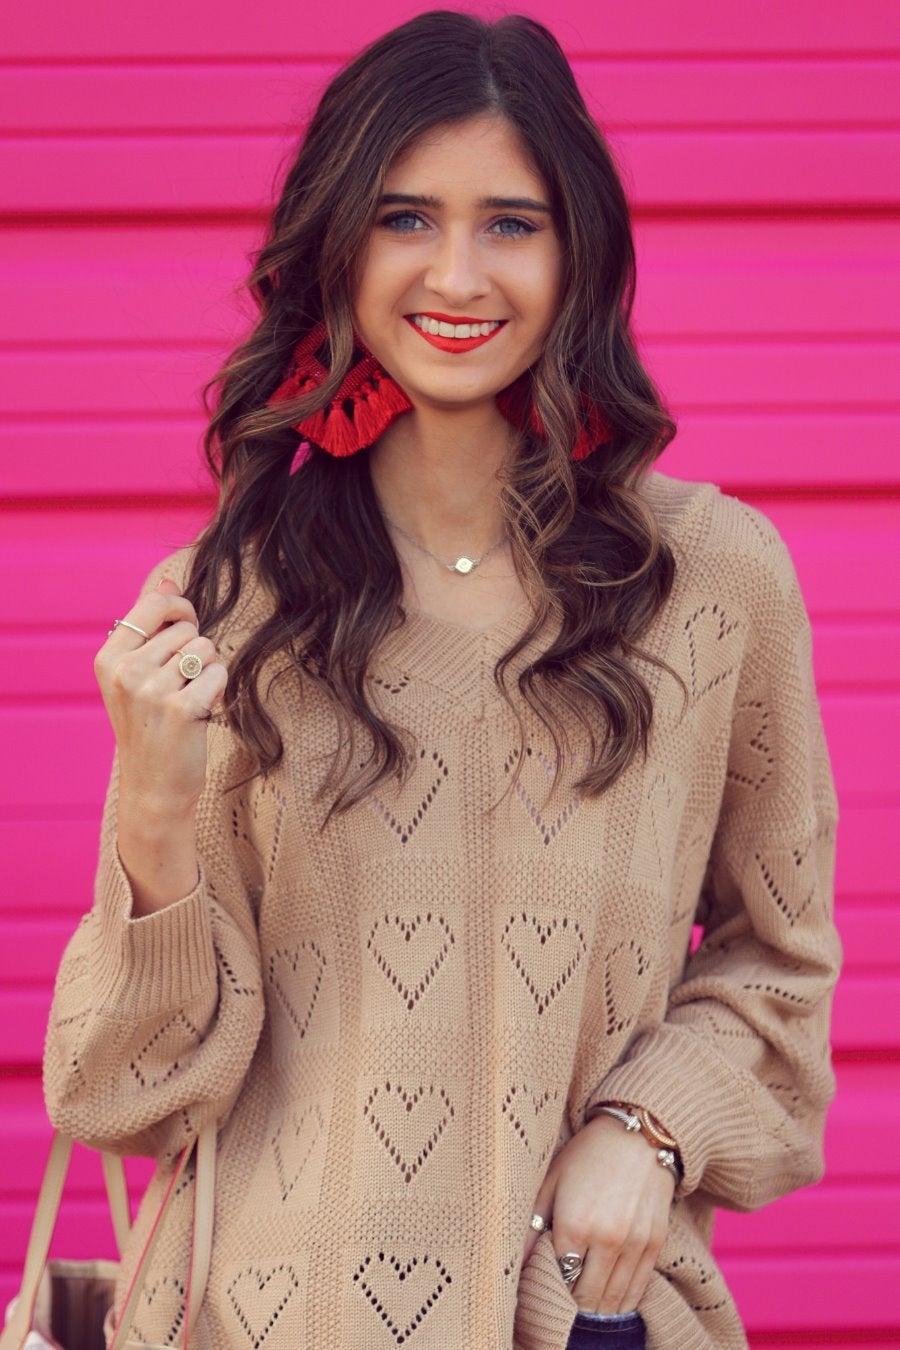 Be Mine Cut Out Heart Sweater